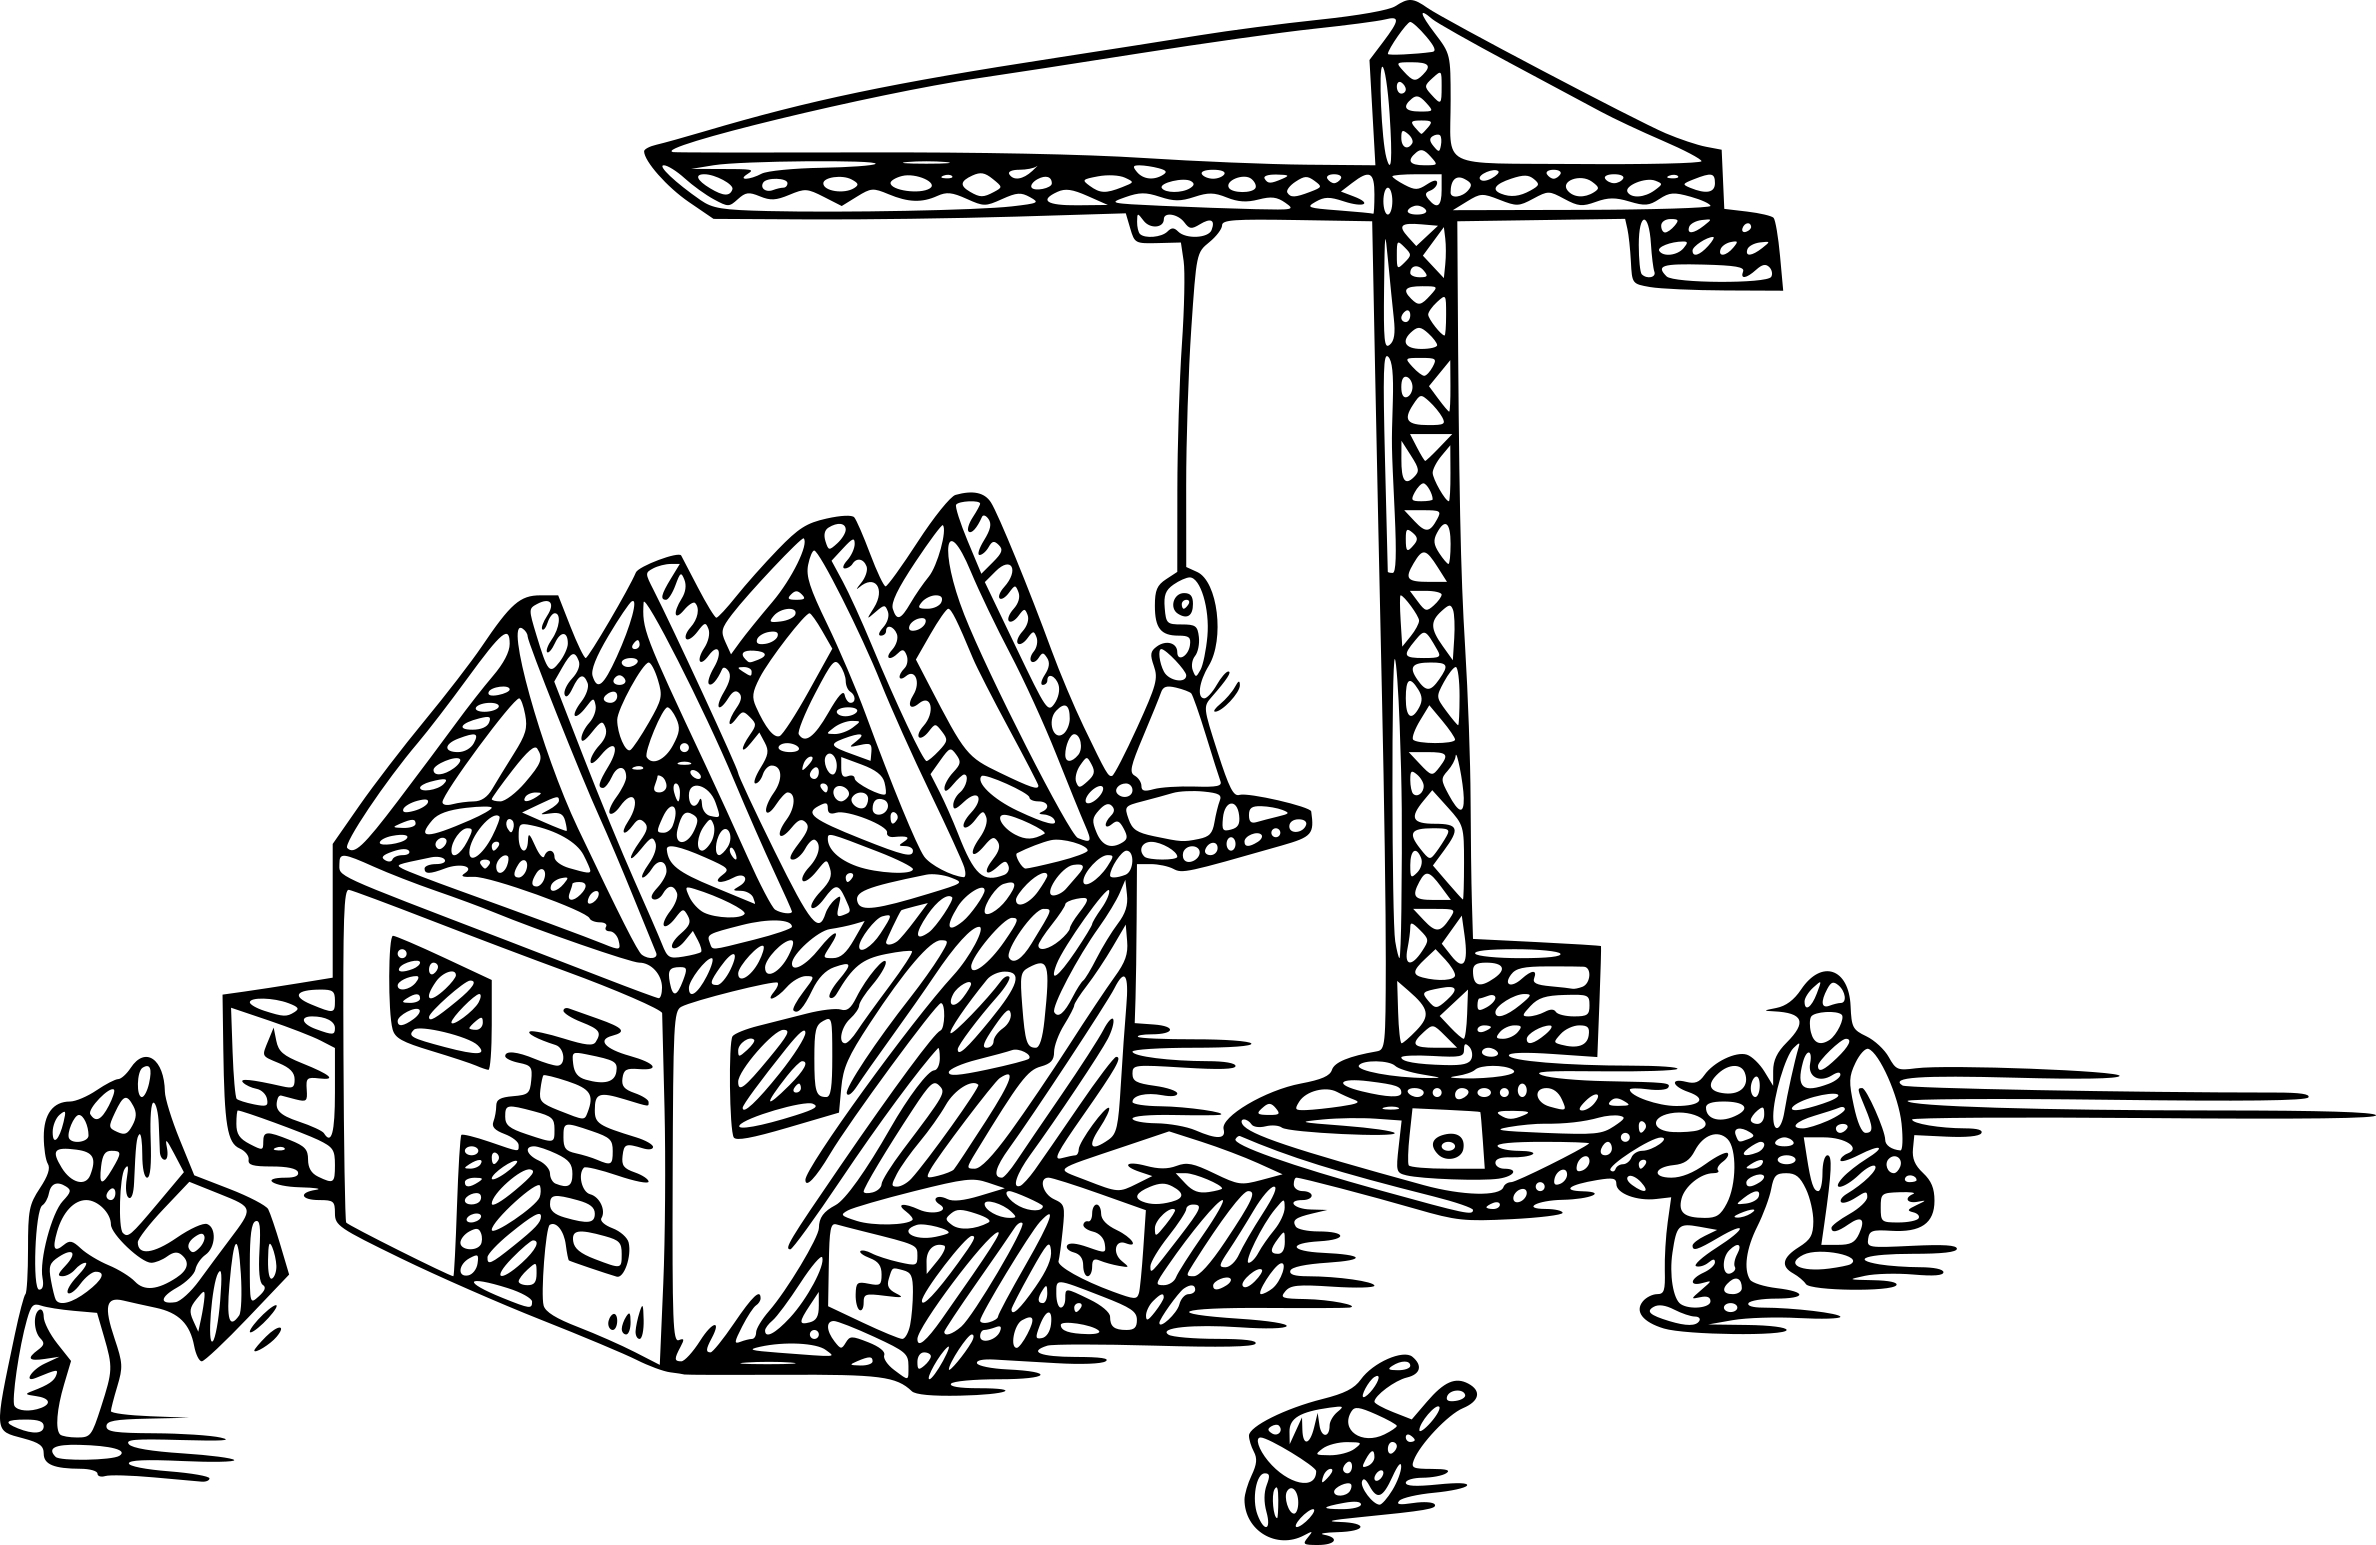 Construction Site drawing and coloring page